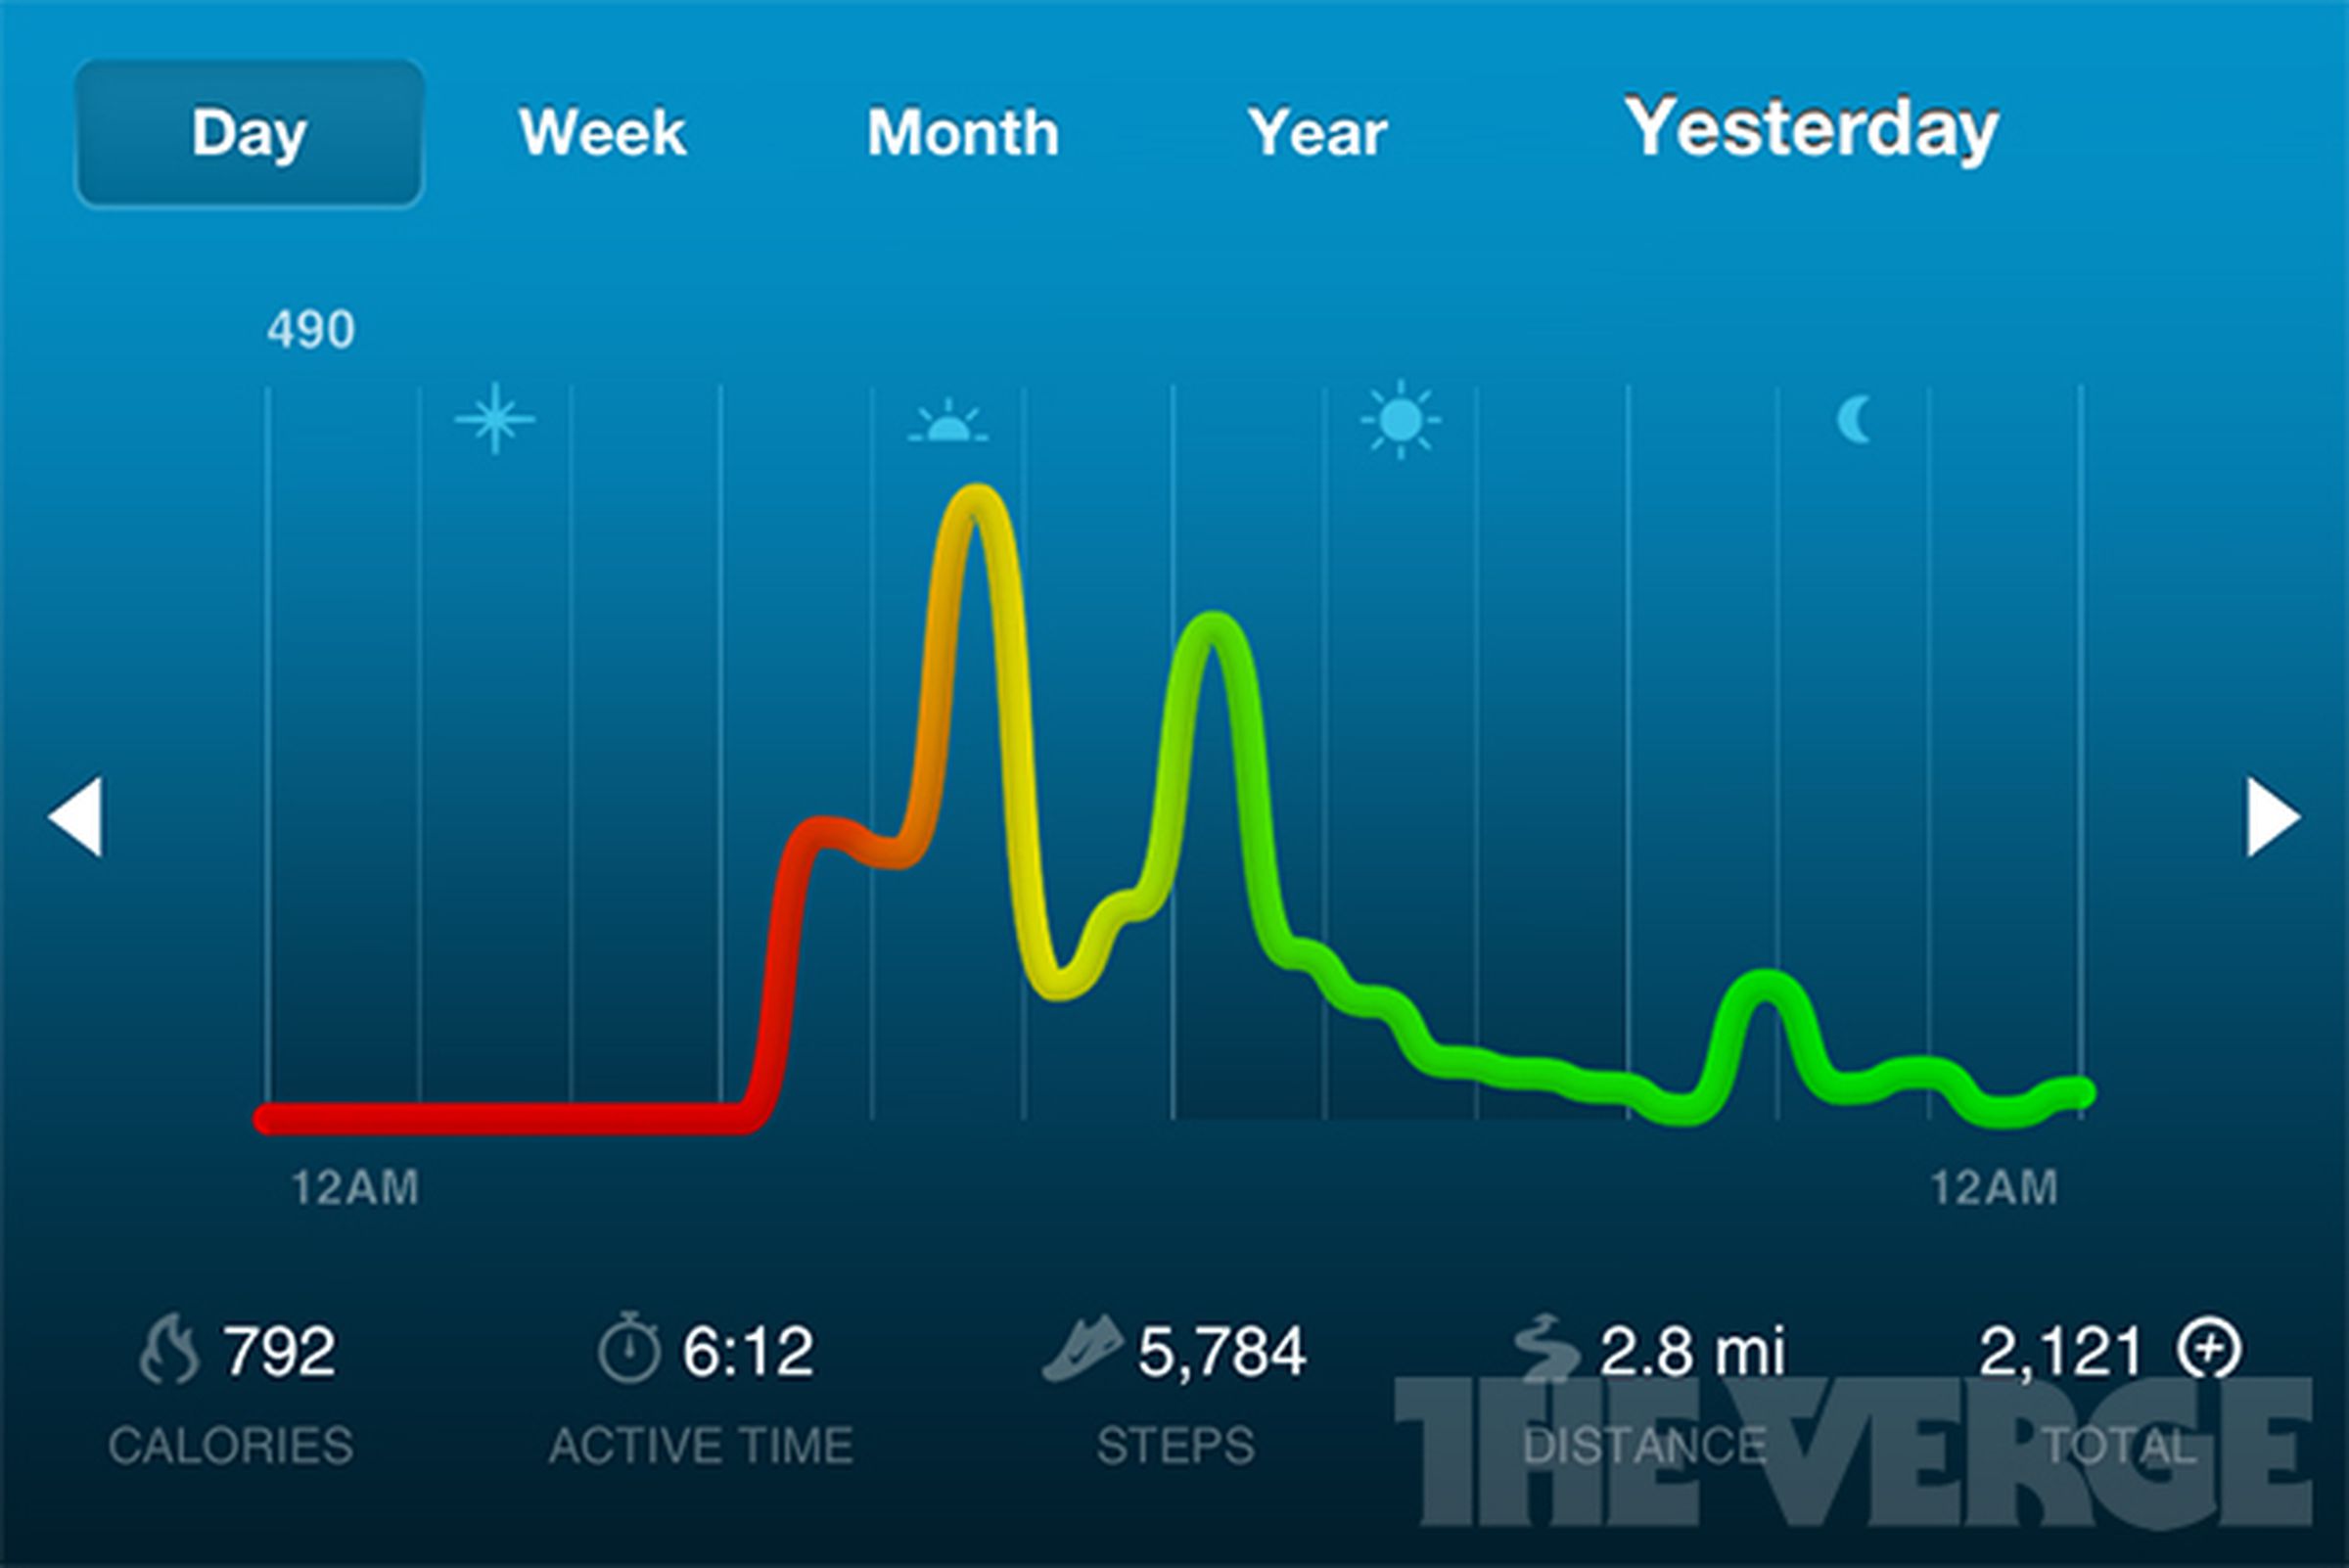 Nike+ FuelBand iOS app and website review images